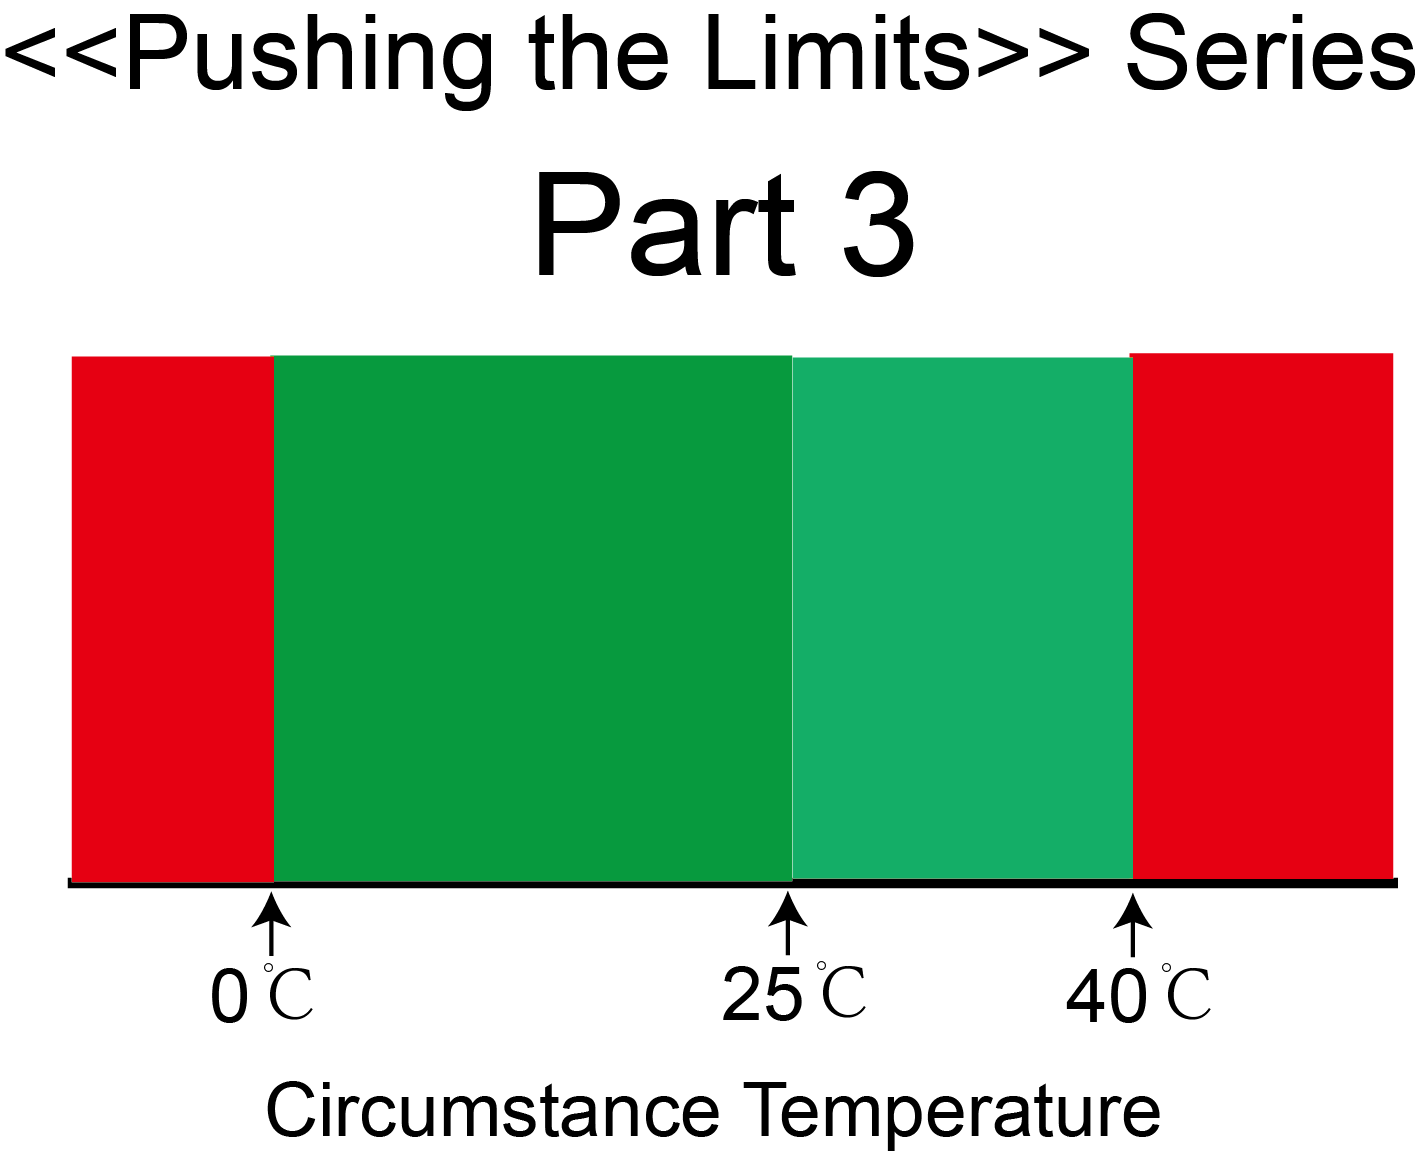 What Can Happen When Circumstance Temperature Exceed a Power Supply's Working Temperature Range?